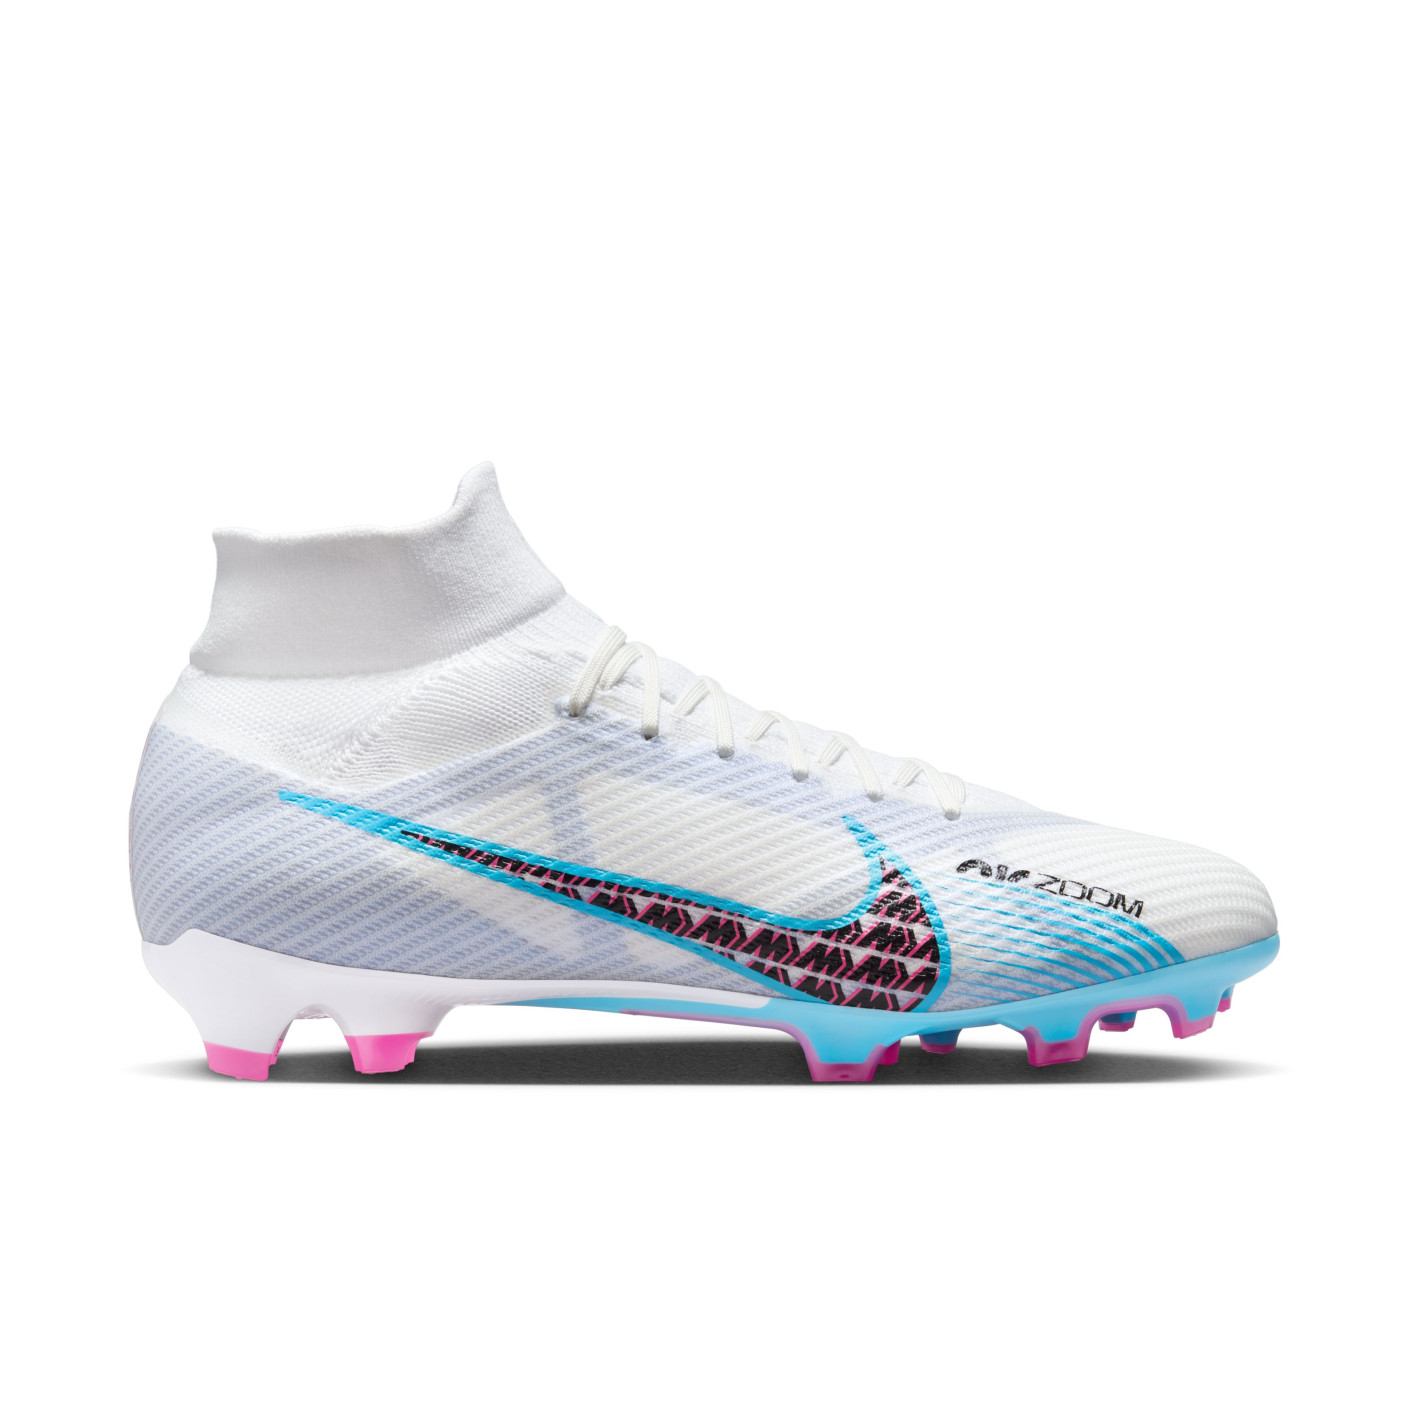 Nike Zoom Mercurial Superfly 9 Pro Grass Football Shoes (FG) White Blue Pink